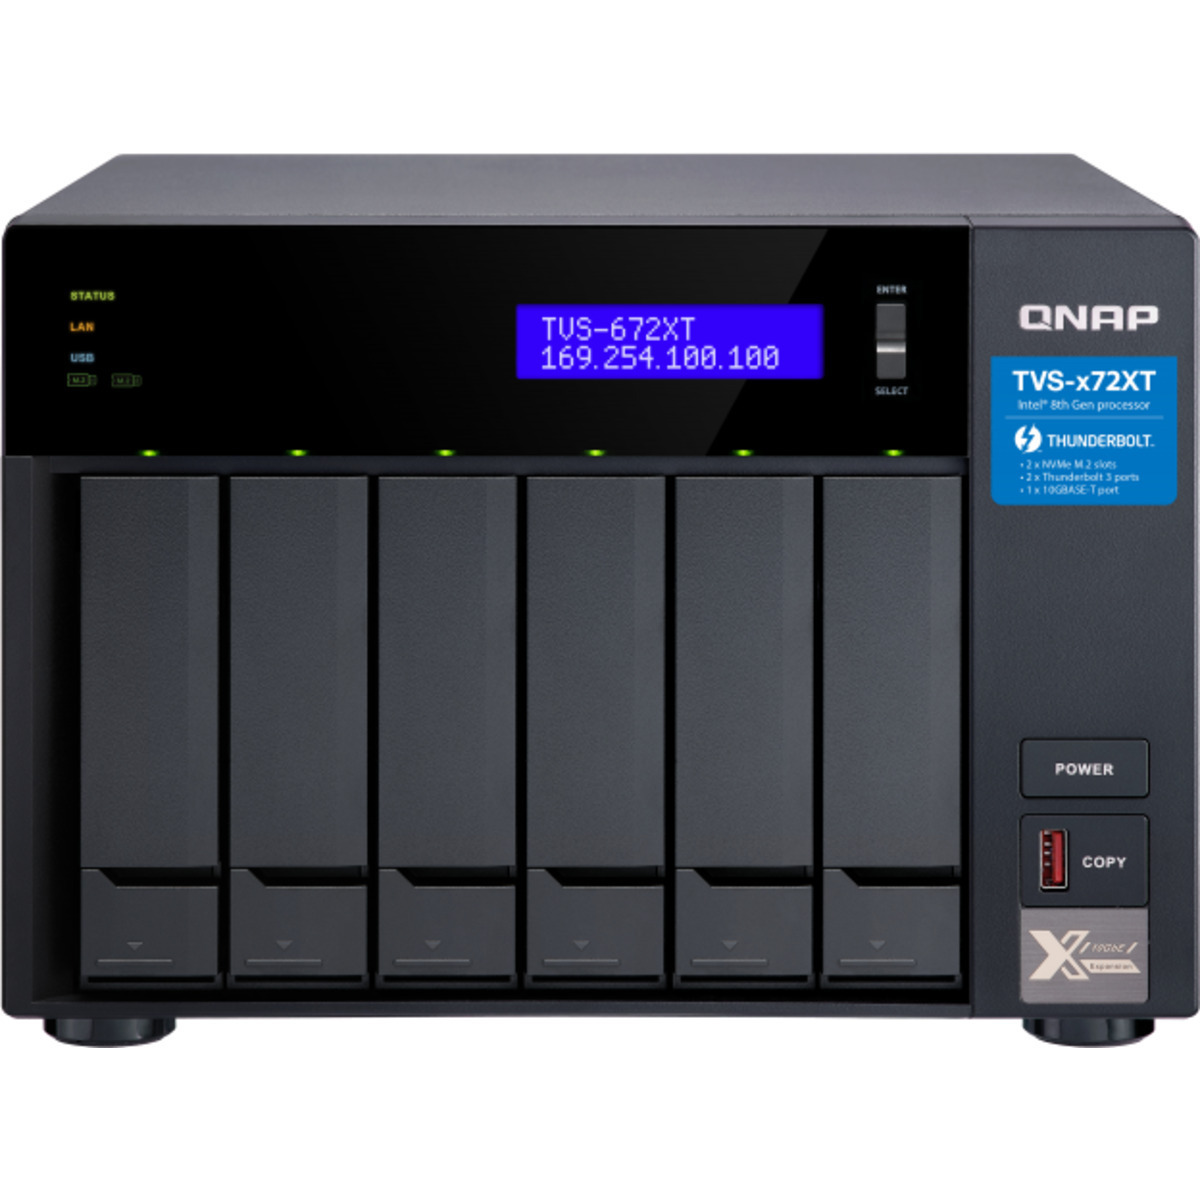 QNAP TVS-672XT Thunderbolt 3 80tb 6-Bay Desktop Multimedia / Power User / Business DAS-NAS - Combo Direct + Network Storage Device 4x20tb Seagate IronWolf Pro ST20000NT001 3.5 7200rpm SATA 6Gb/s HDD NAS Class Drives Installed - Burn-In Tested TVS-672XT Thunderbolt 3